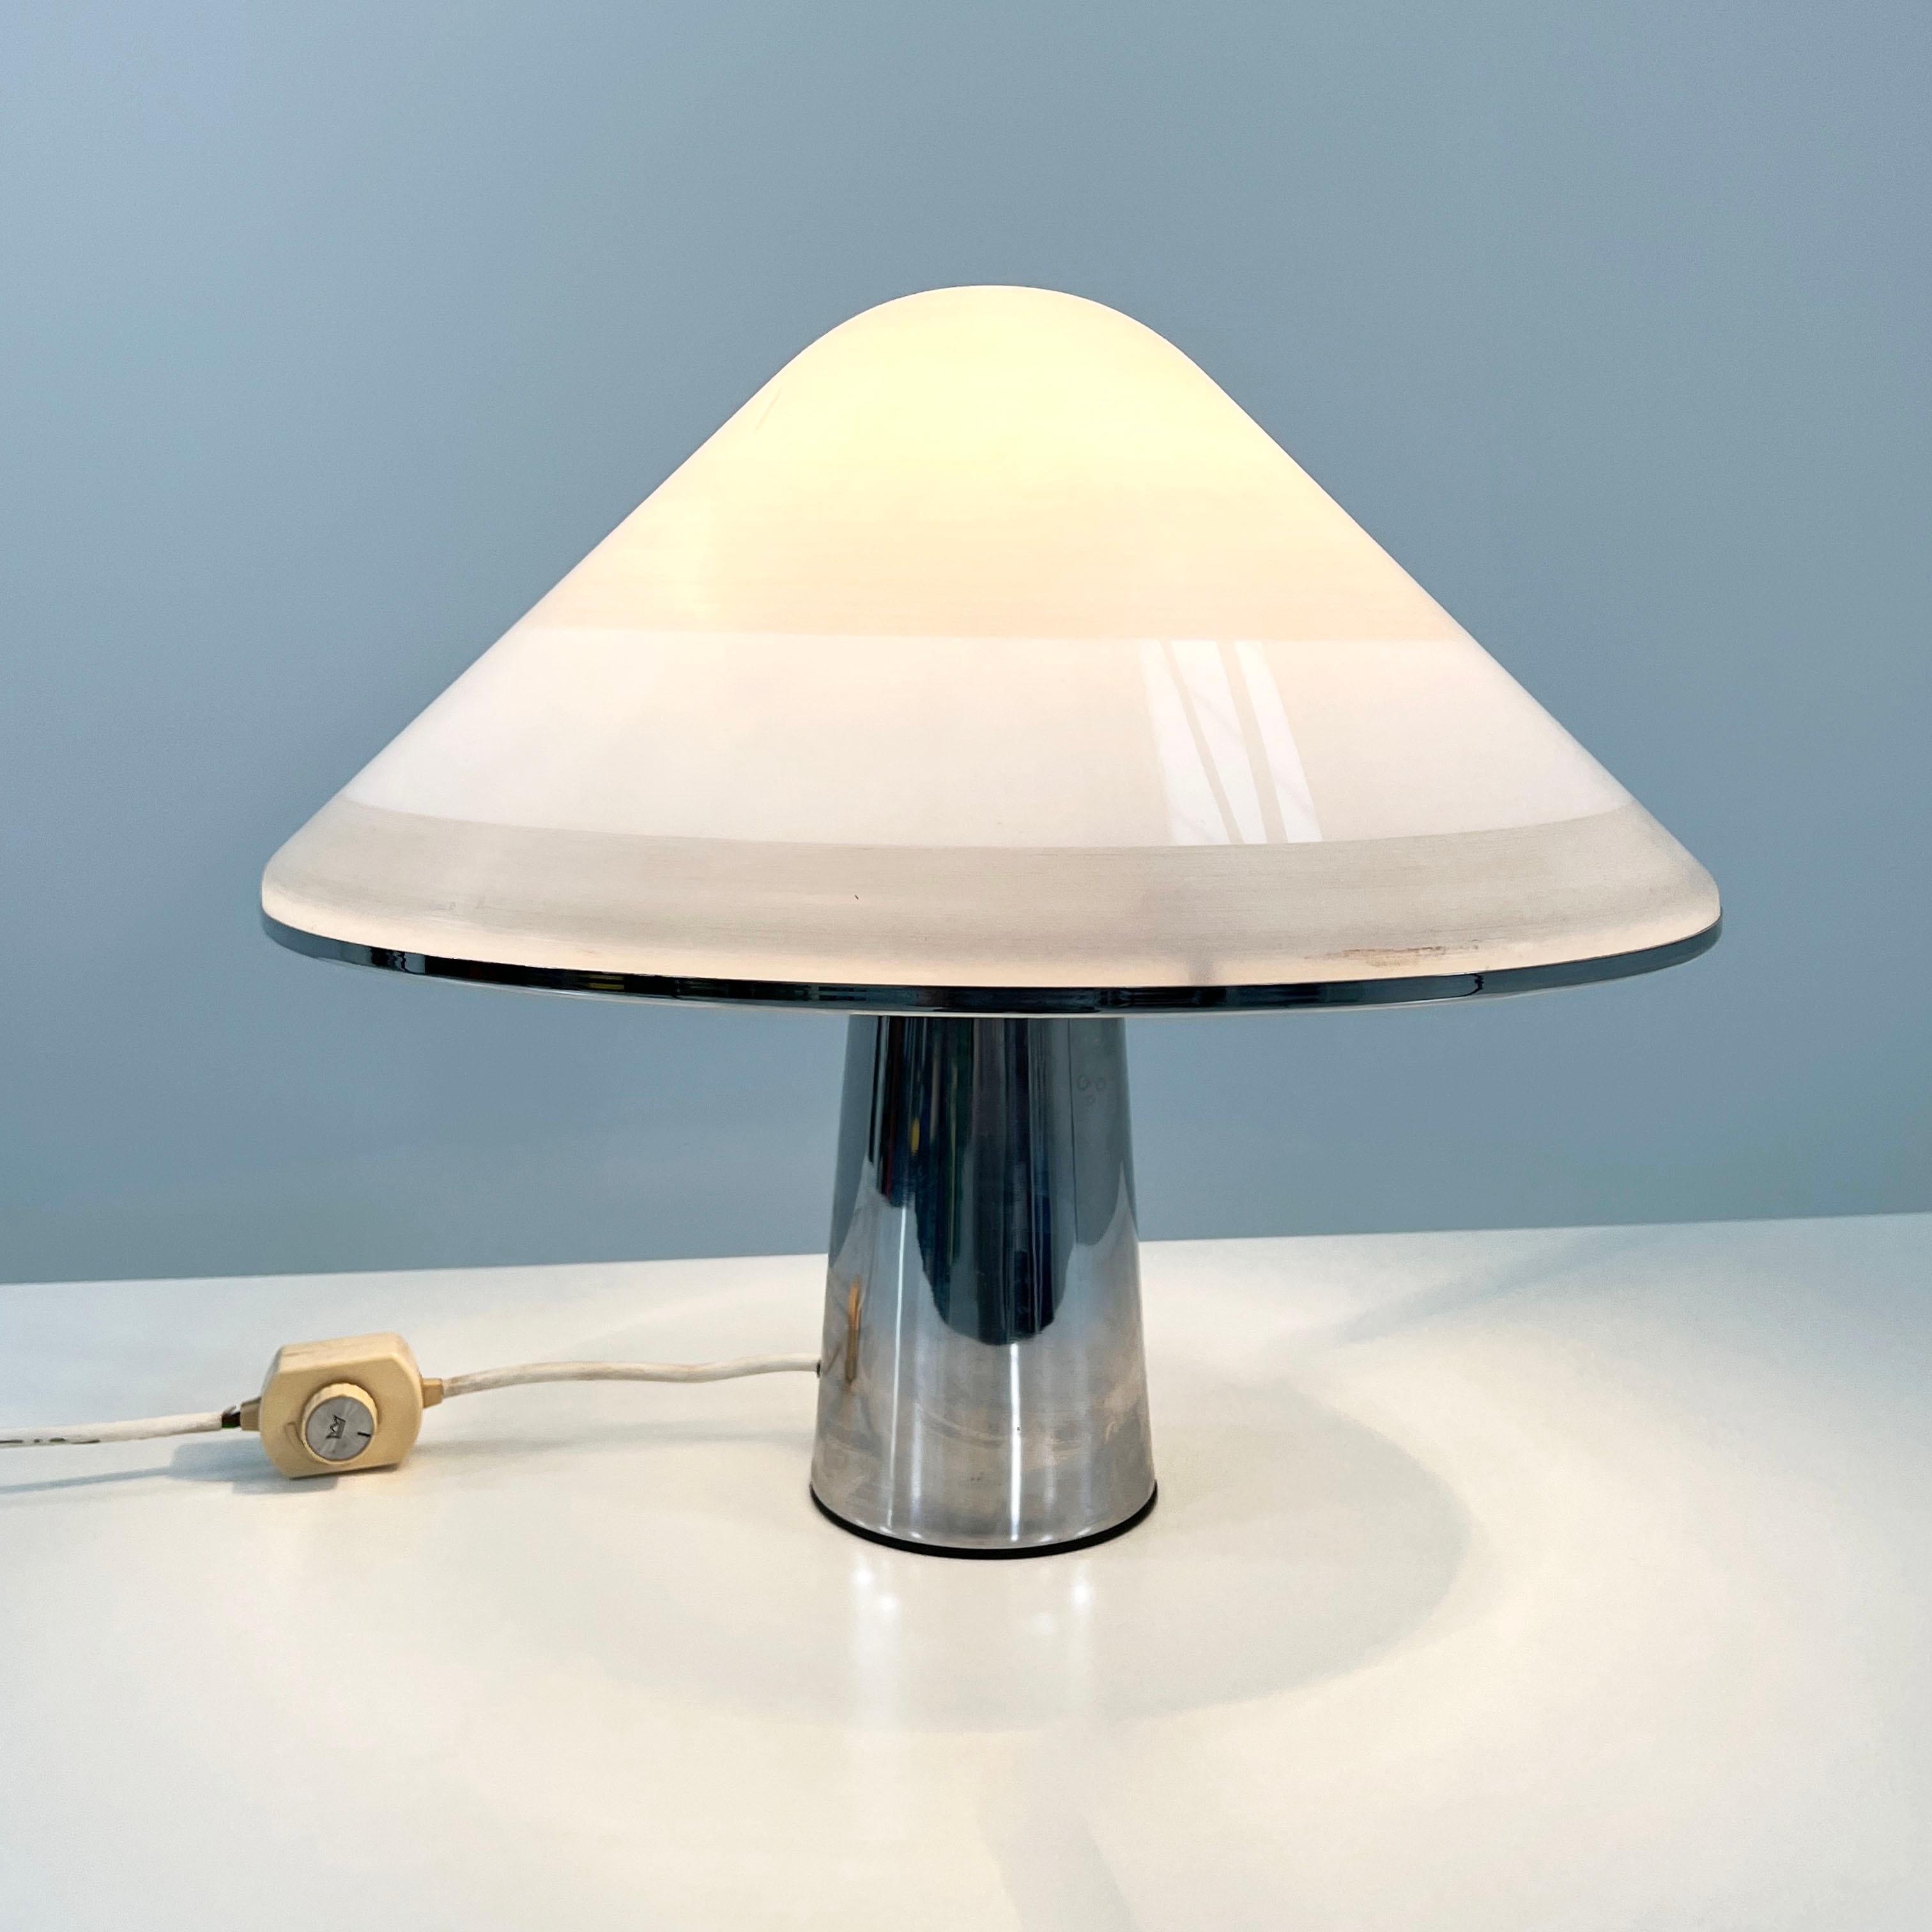 Producer - iGuzzini
Model - Elpis Table Lamp 
Design Period - Seventies
Measurements - Width 50 cm x Depth 50 cm x Height 40 cm 
Materials - Perspex plastic, chrome plating, metal 
Color - White, Silver
Light wear consistent with age and use.